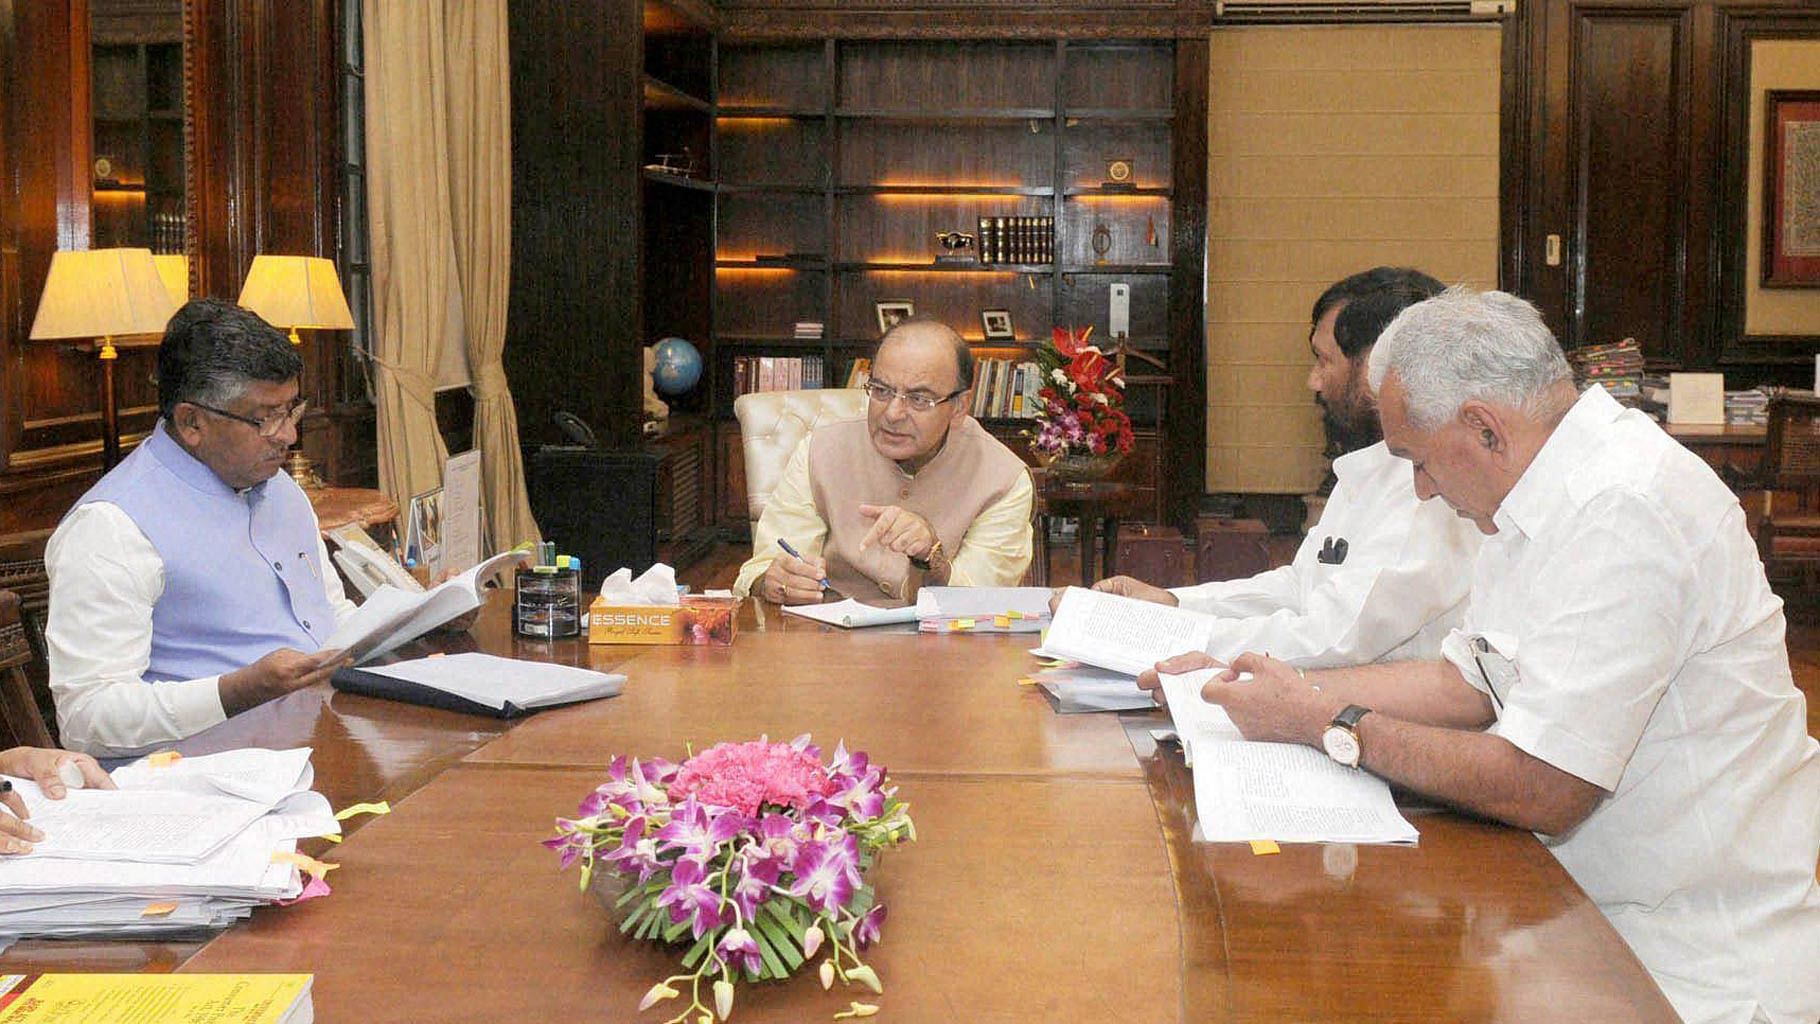  Union Minister for Finance and Corporate Affairs, Arun Jaitley chairing a meeting of the Group of Ministers (GoM) on issues relating to Amendments to Consumer Protection Bill 2015. (Photo: PTI)